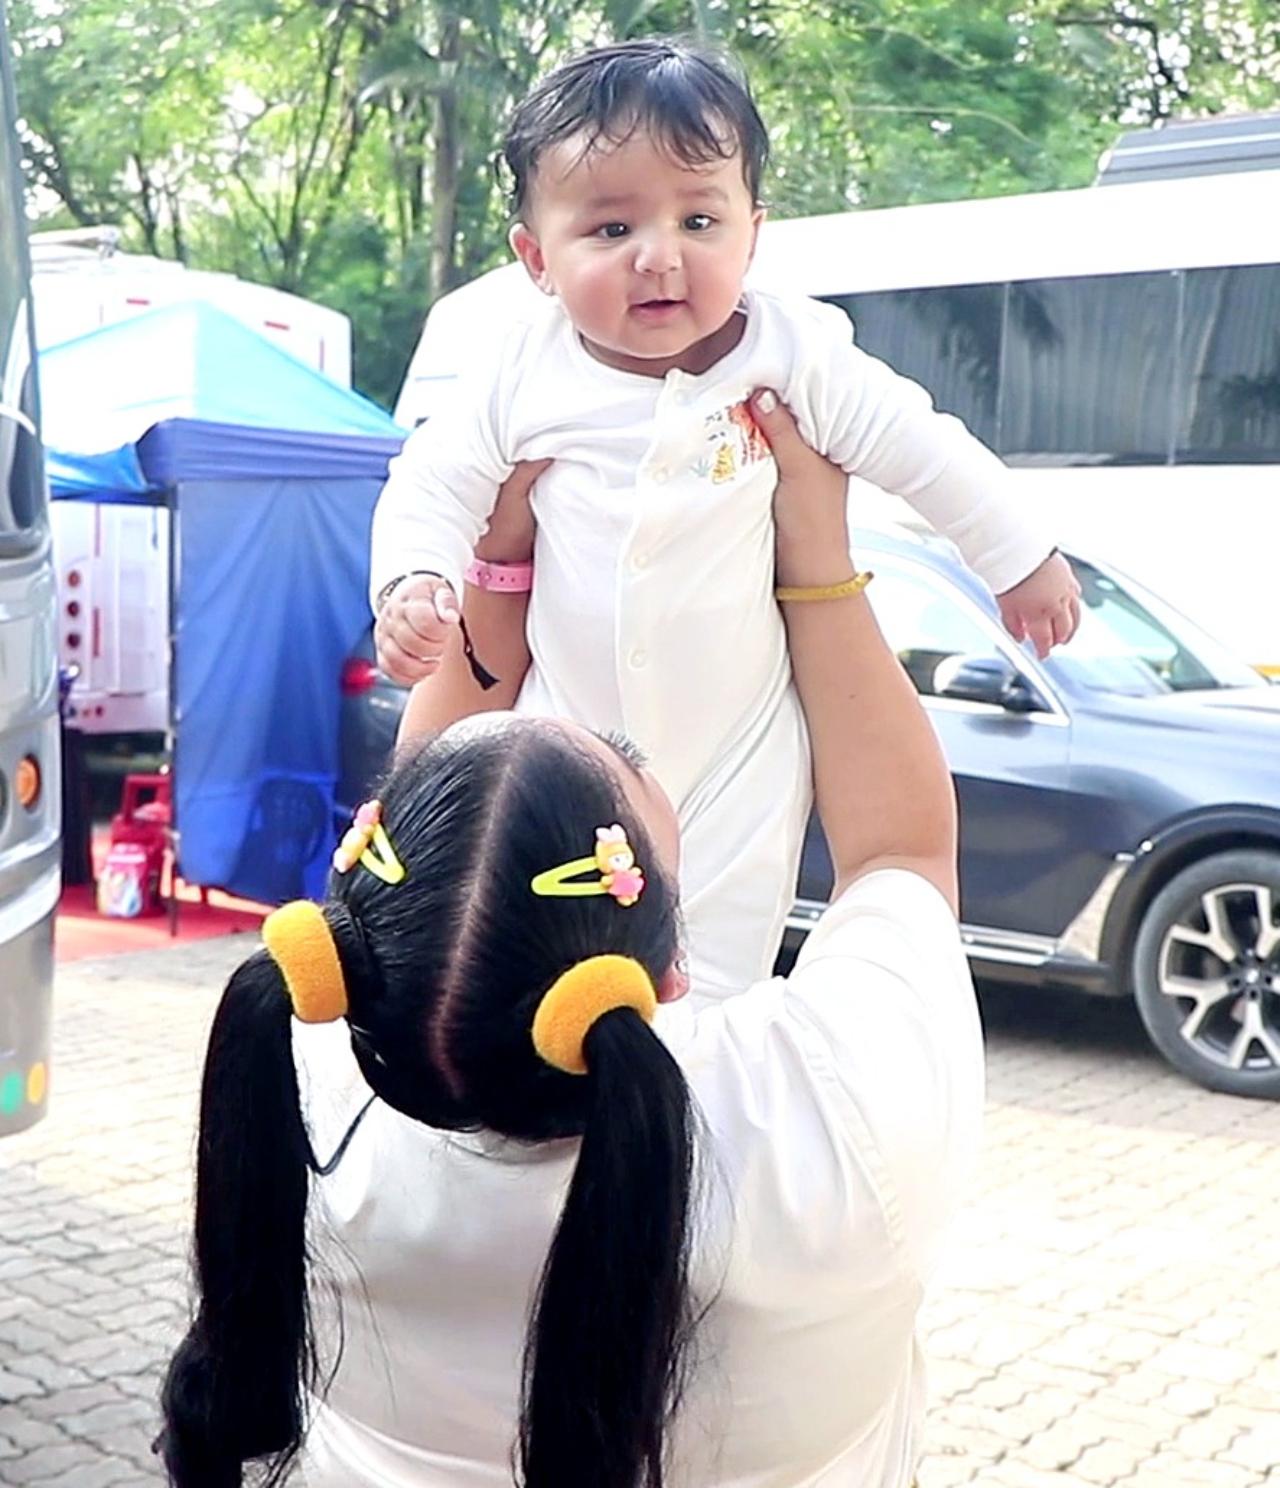 On Monday, Bharti brought her little one yp the sets of the upcoming show Sa Re Ga Ma Pa L'il Champs. She was seen happily posing with her little one for the paparazzi